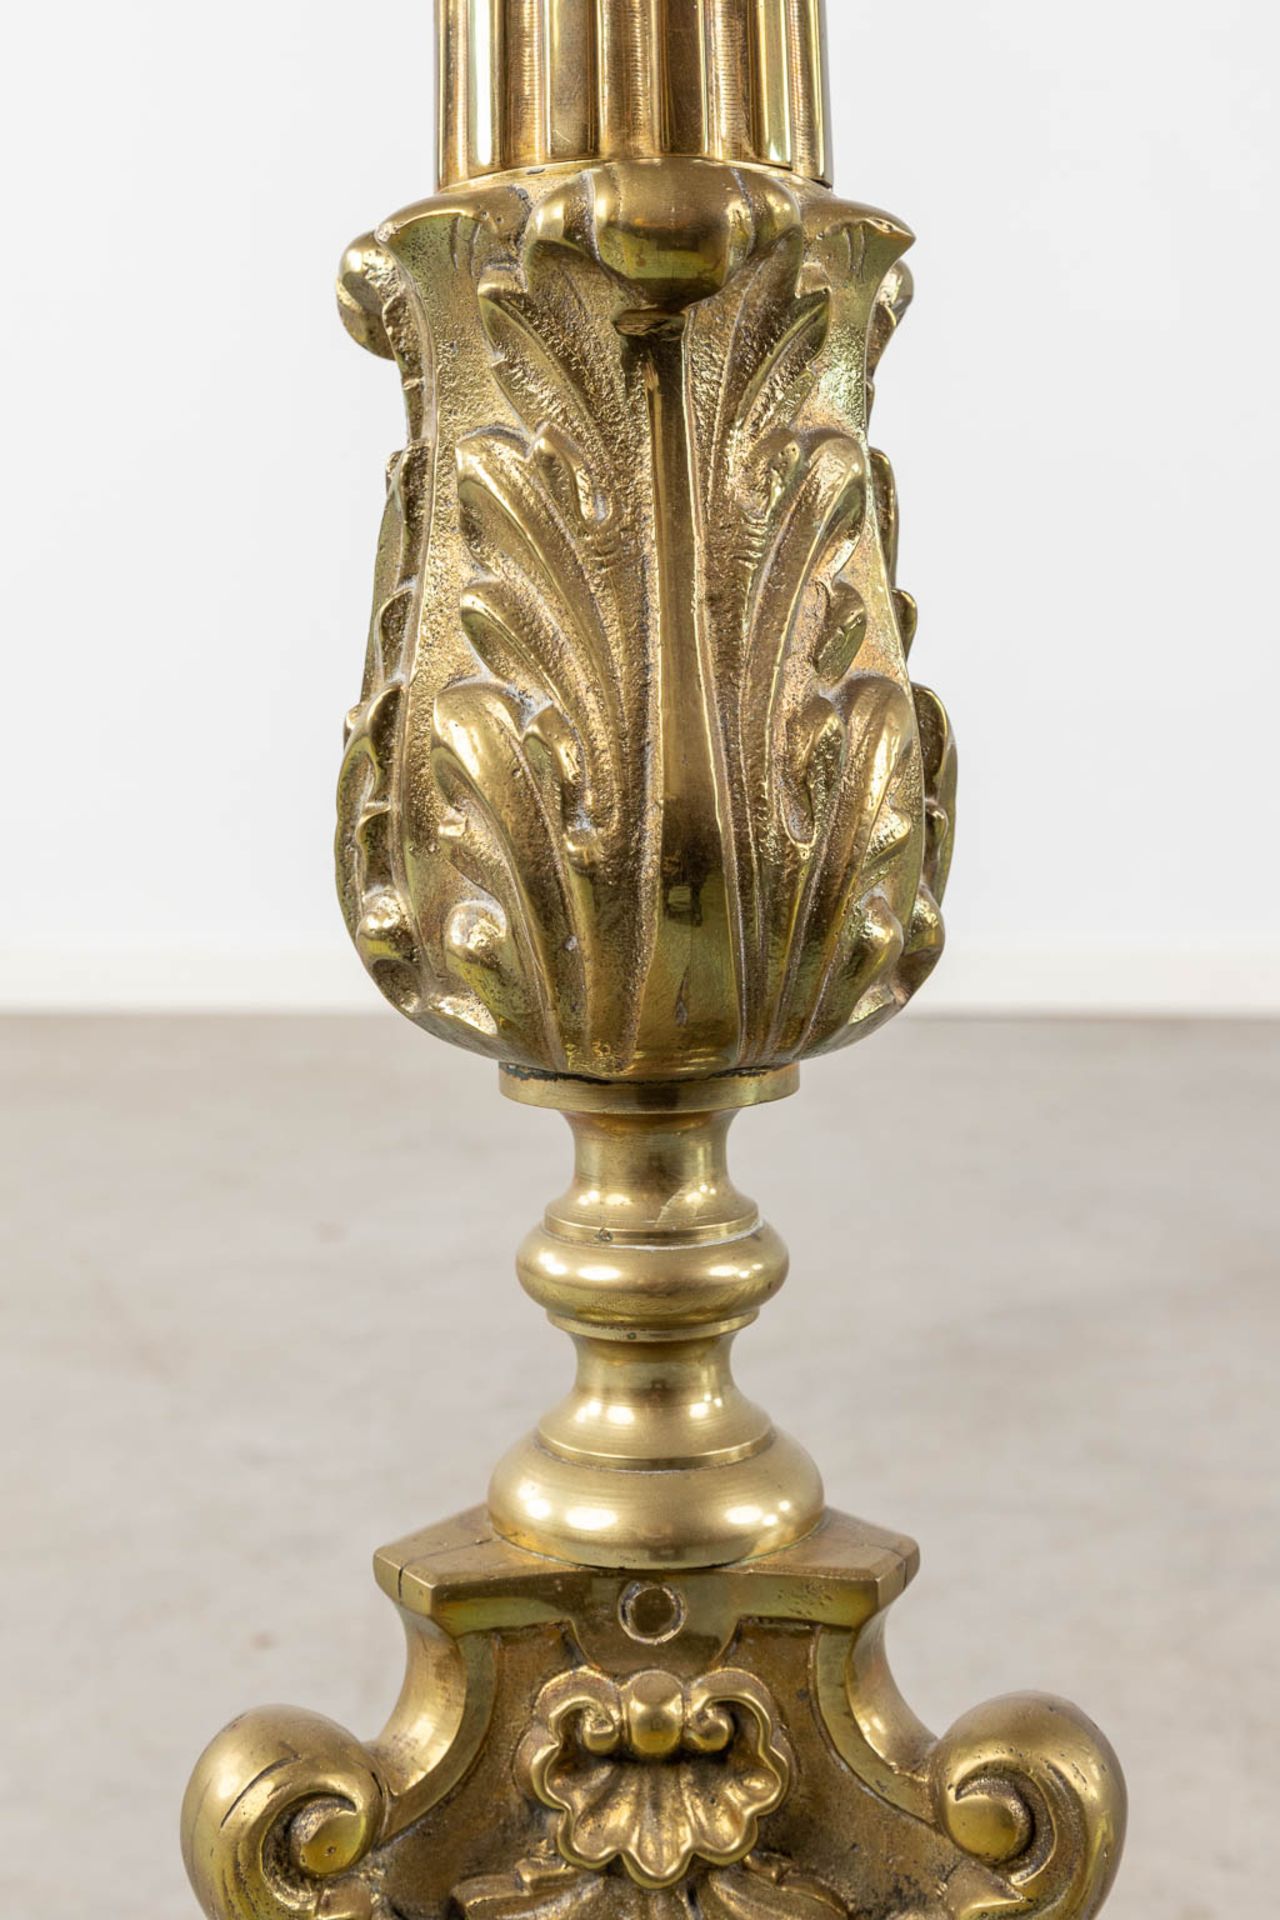 A pair of bronze church candlesticks/candle holders, Louis XV style. Circa 1900. (W:23 x H:105 cm) - Image 8 of 19